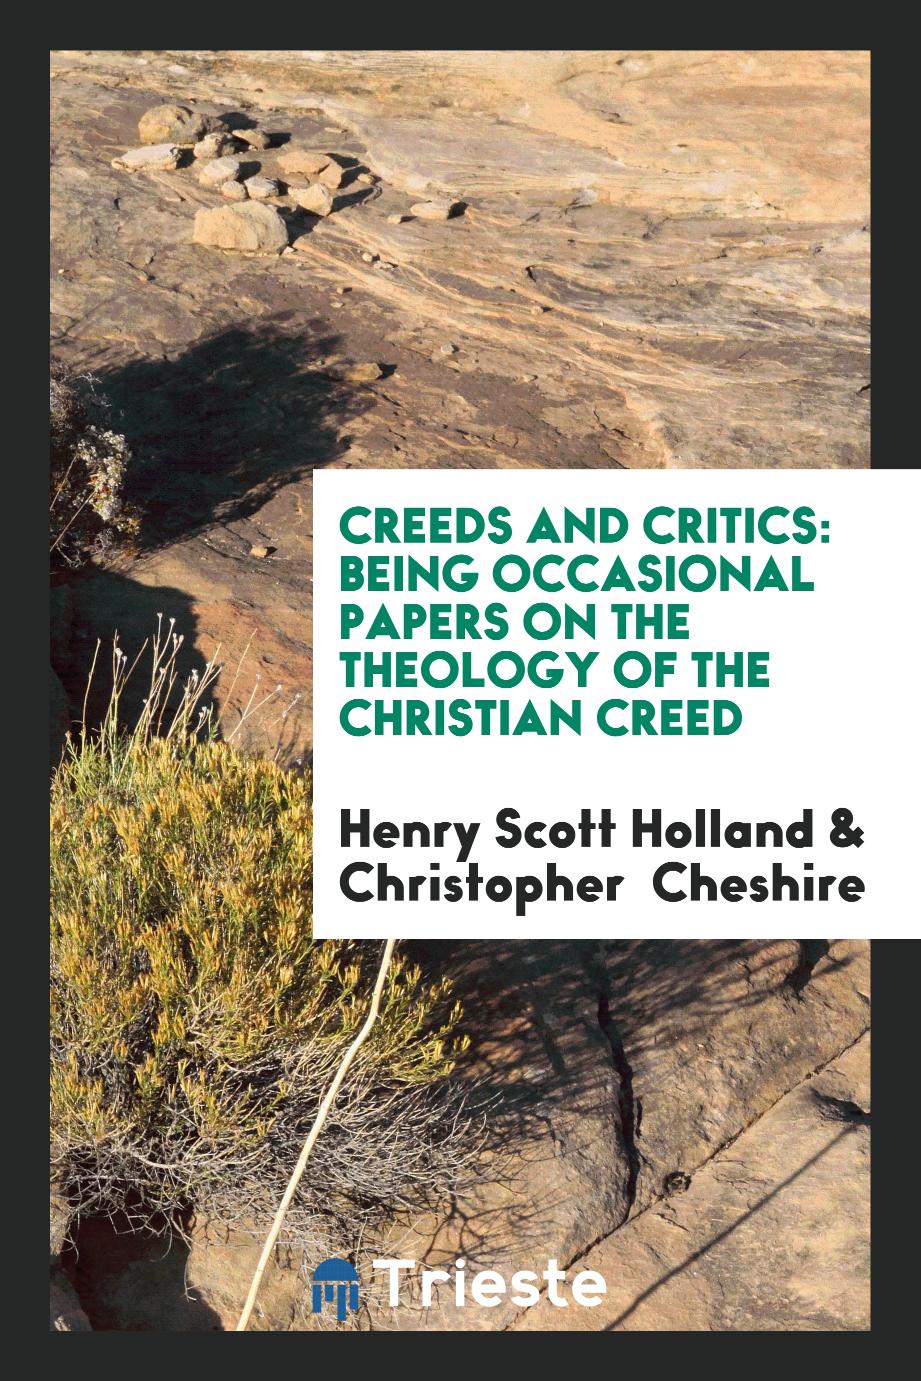 Creeds and critics: being occasional papers on the theology of the Christian creed